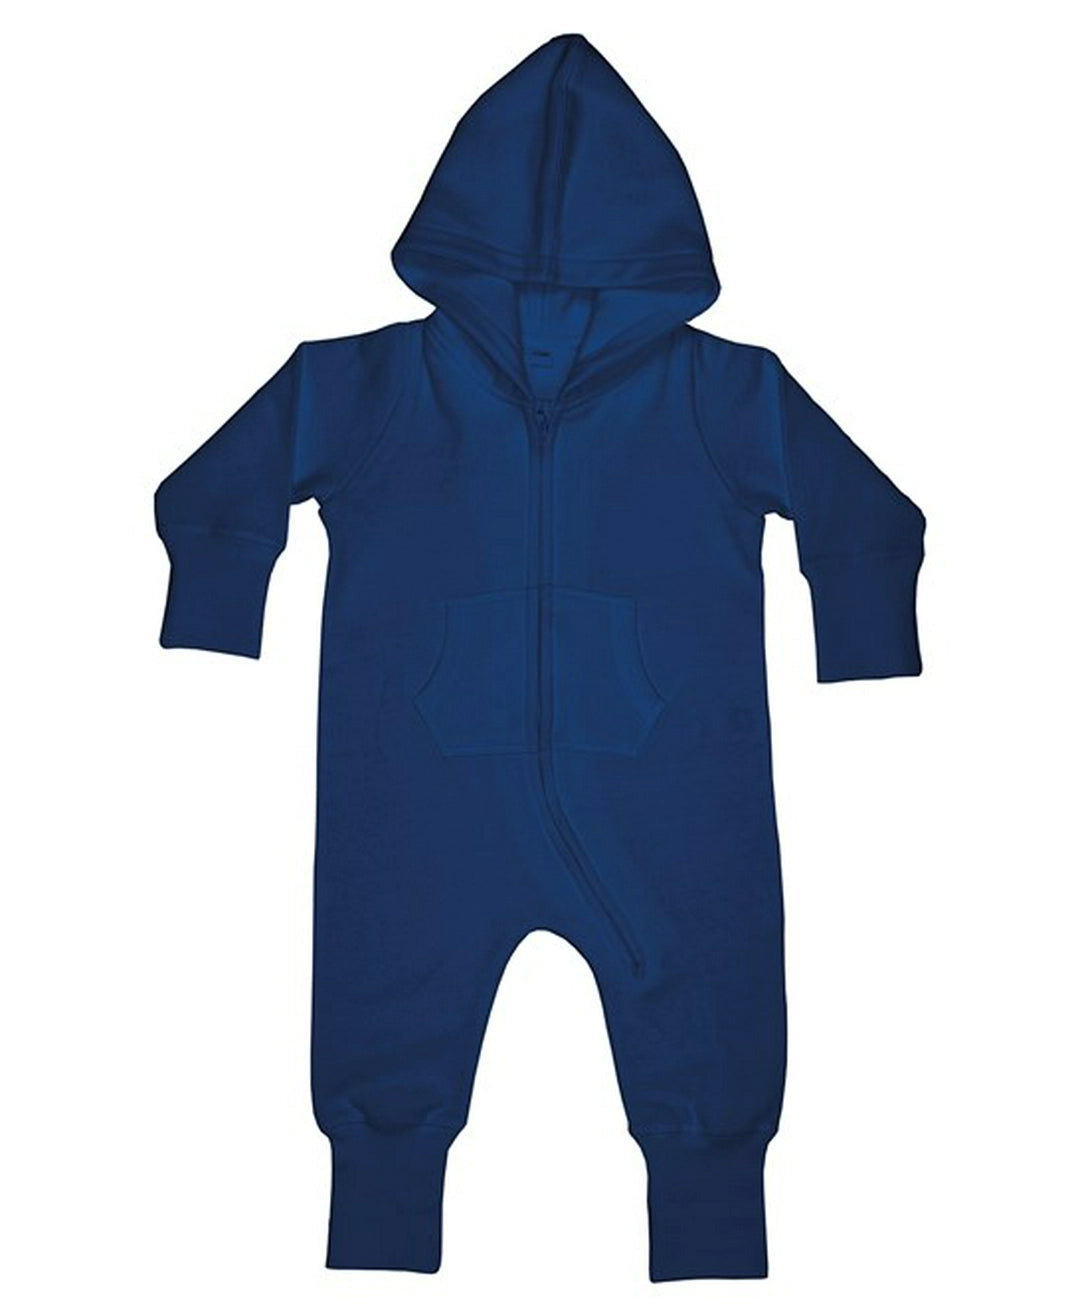 BabyBugz Baby All In One-NVY6-12